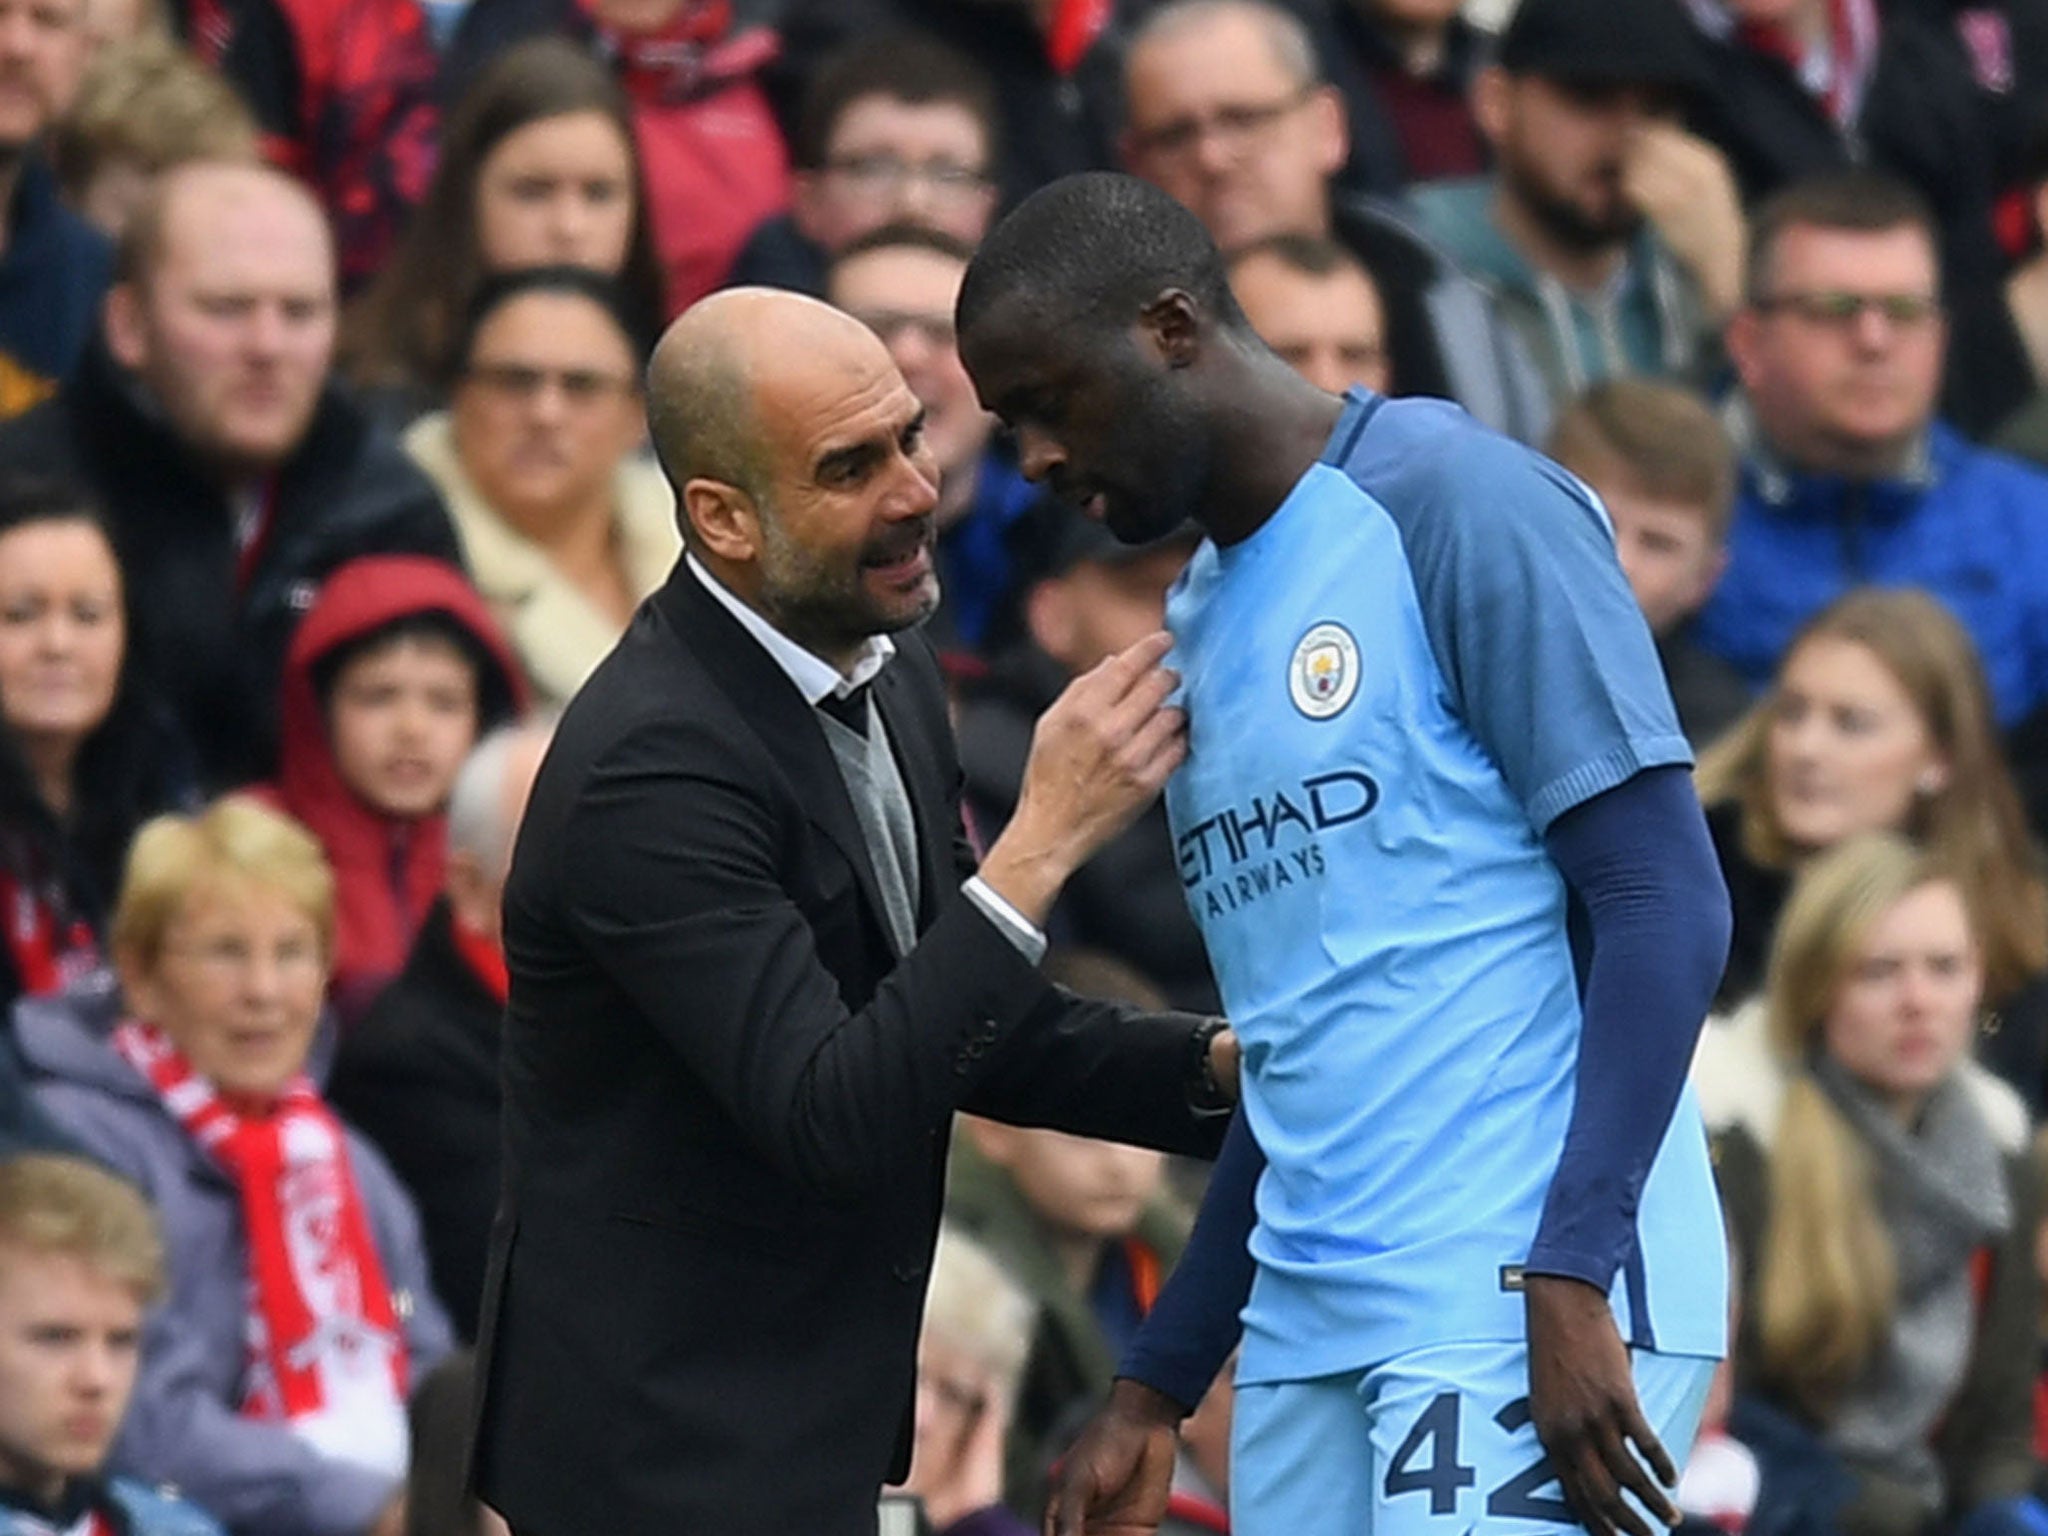 Guardiola talks to Toure during Saturday's FA Cup game against Middlesbrough